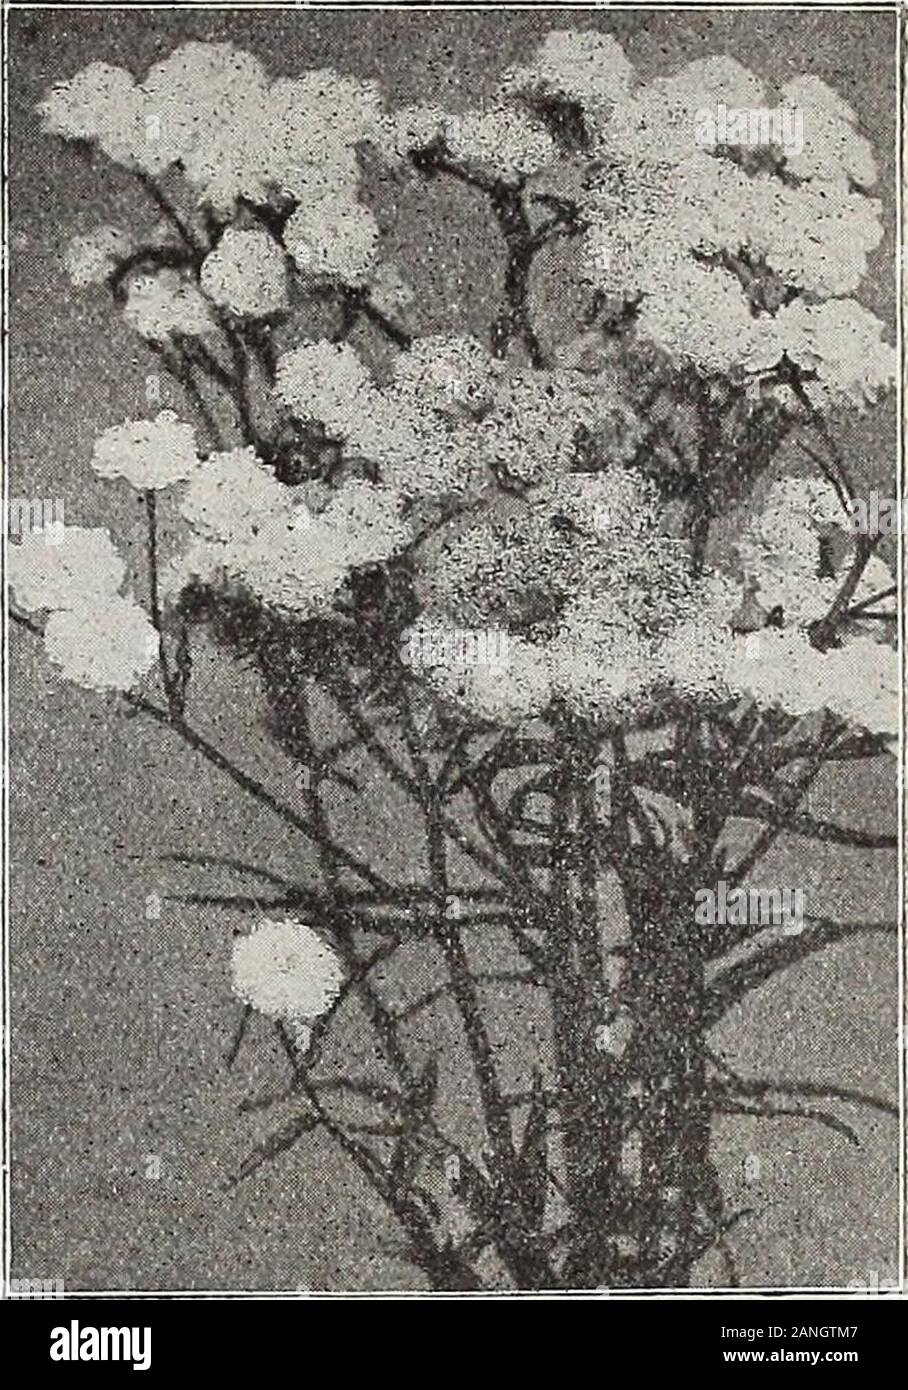 Dreer's 72nd annual edition garden book : 1910 . RionhTKUA Ravs rtF Gt&gt;rn HARDY PHLOXES are one of our leading •peci4kltieft. See pages 2#€ and 267. General List of Hardy Perennial Plants For New and Rare Varieties see pages 174 to 178. @ ifiA. orders are forwarded upon receipt, unless instructed to the contrary. Custom-OS placing orders for Stock to be reserved and sent later must distinctly specifyttas at the time of ordering.. Achillea The Pearl. F^ AC^XA (New Zealand BurrPretty evergreen rock plants of cushion-like growth, cultivated for their showy,crimson spines, which are borne on t Stock Photo